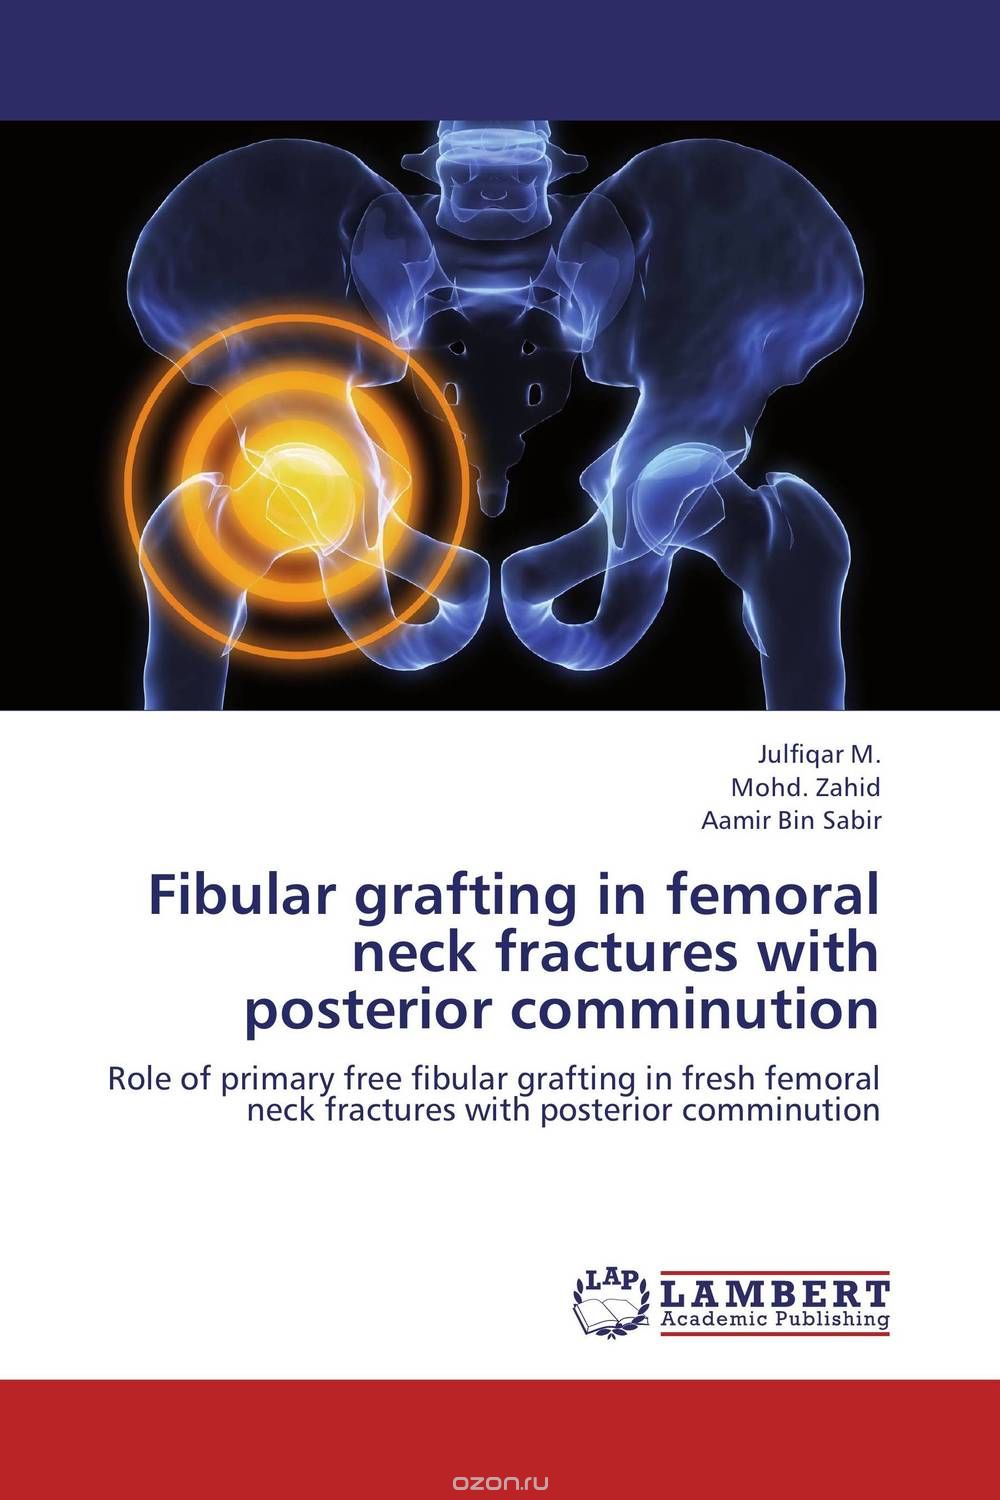 Fibular grafting in femoral neck fractures with posterior comminution